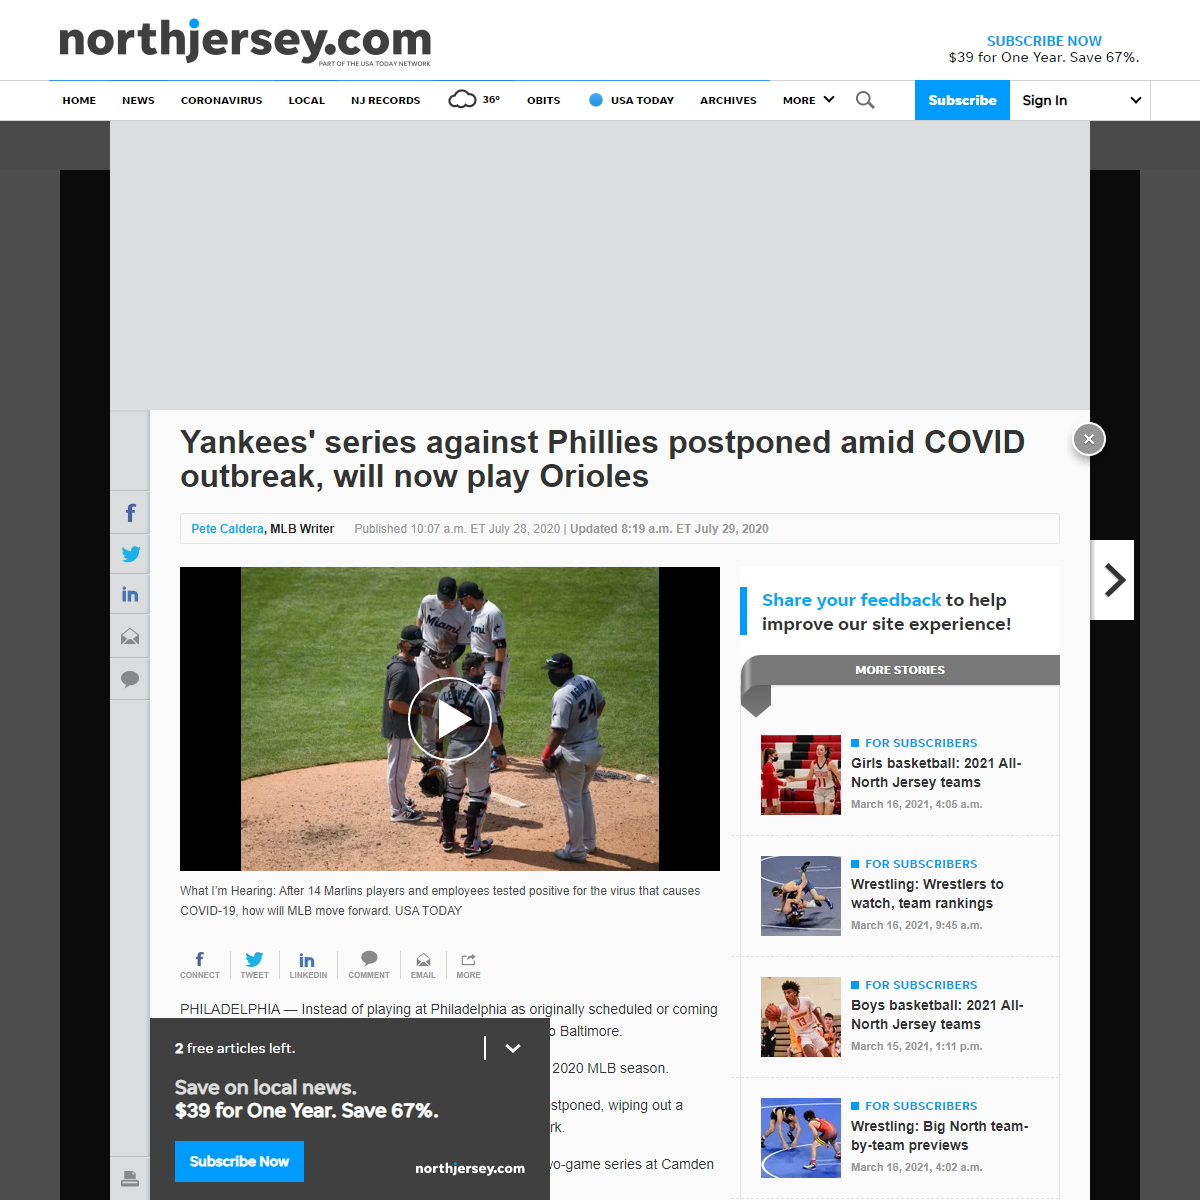 A complete backup of https://www.northjersey.com/story/sports/mlb/yankees/2020/07/28/new-york-yankees-game-vs-philadelphia-phill